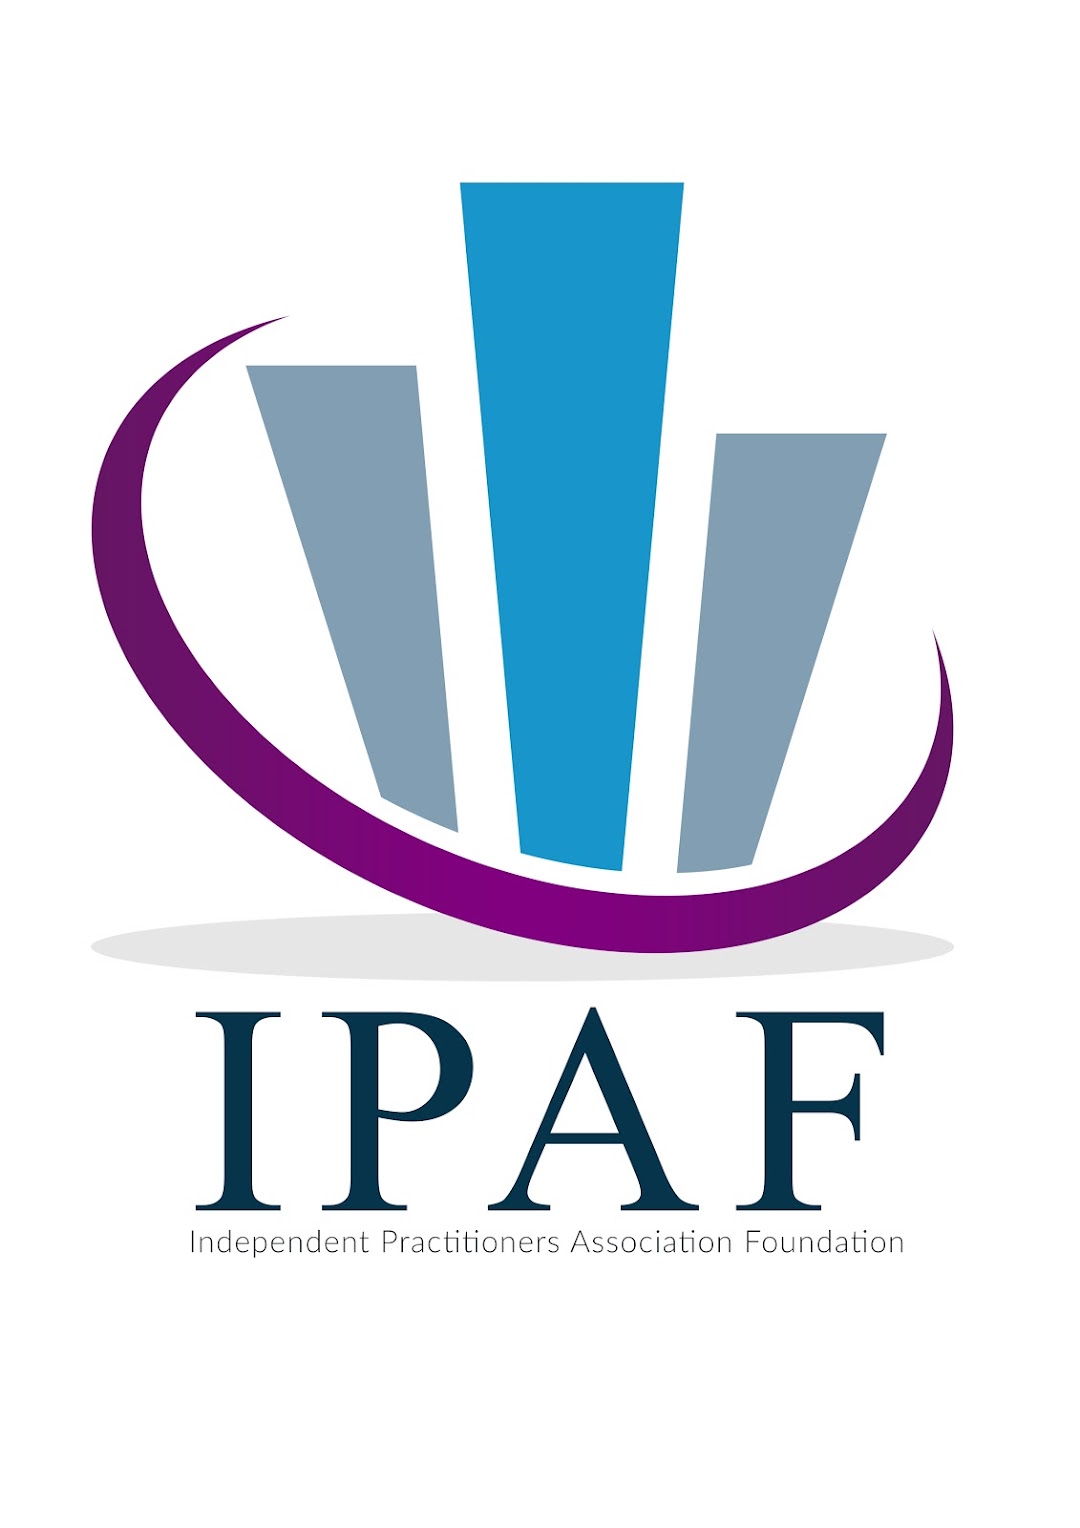 IPA Foundation of South Africa (IPAF)